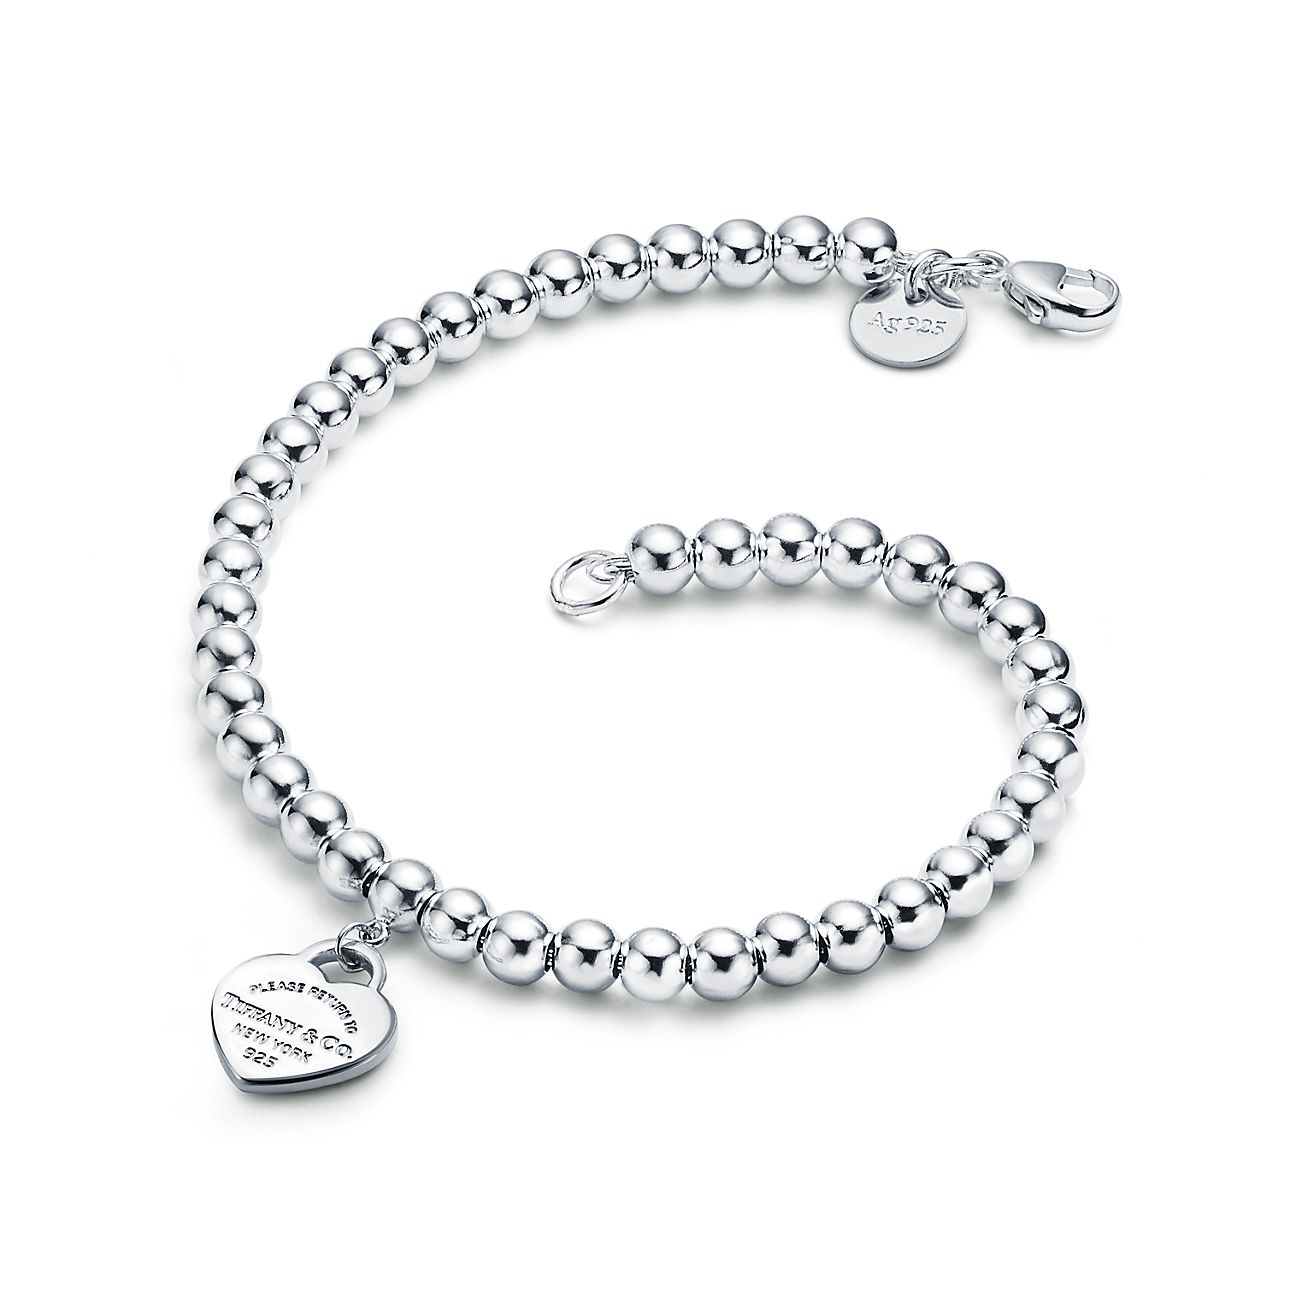 Return to Tiffany™ Heart Tag Bead Bracelet in Silver and Rose Gold, 4 mm |  Tiffany & Co.